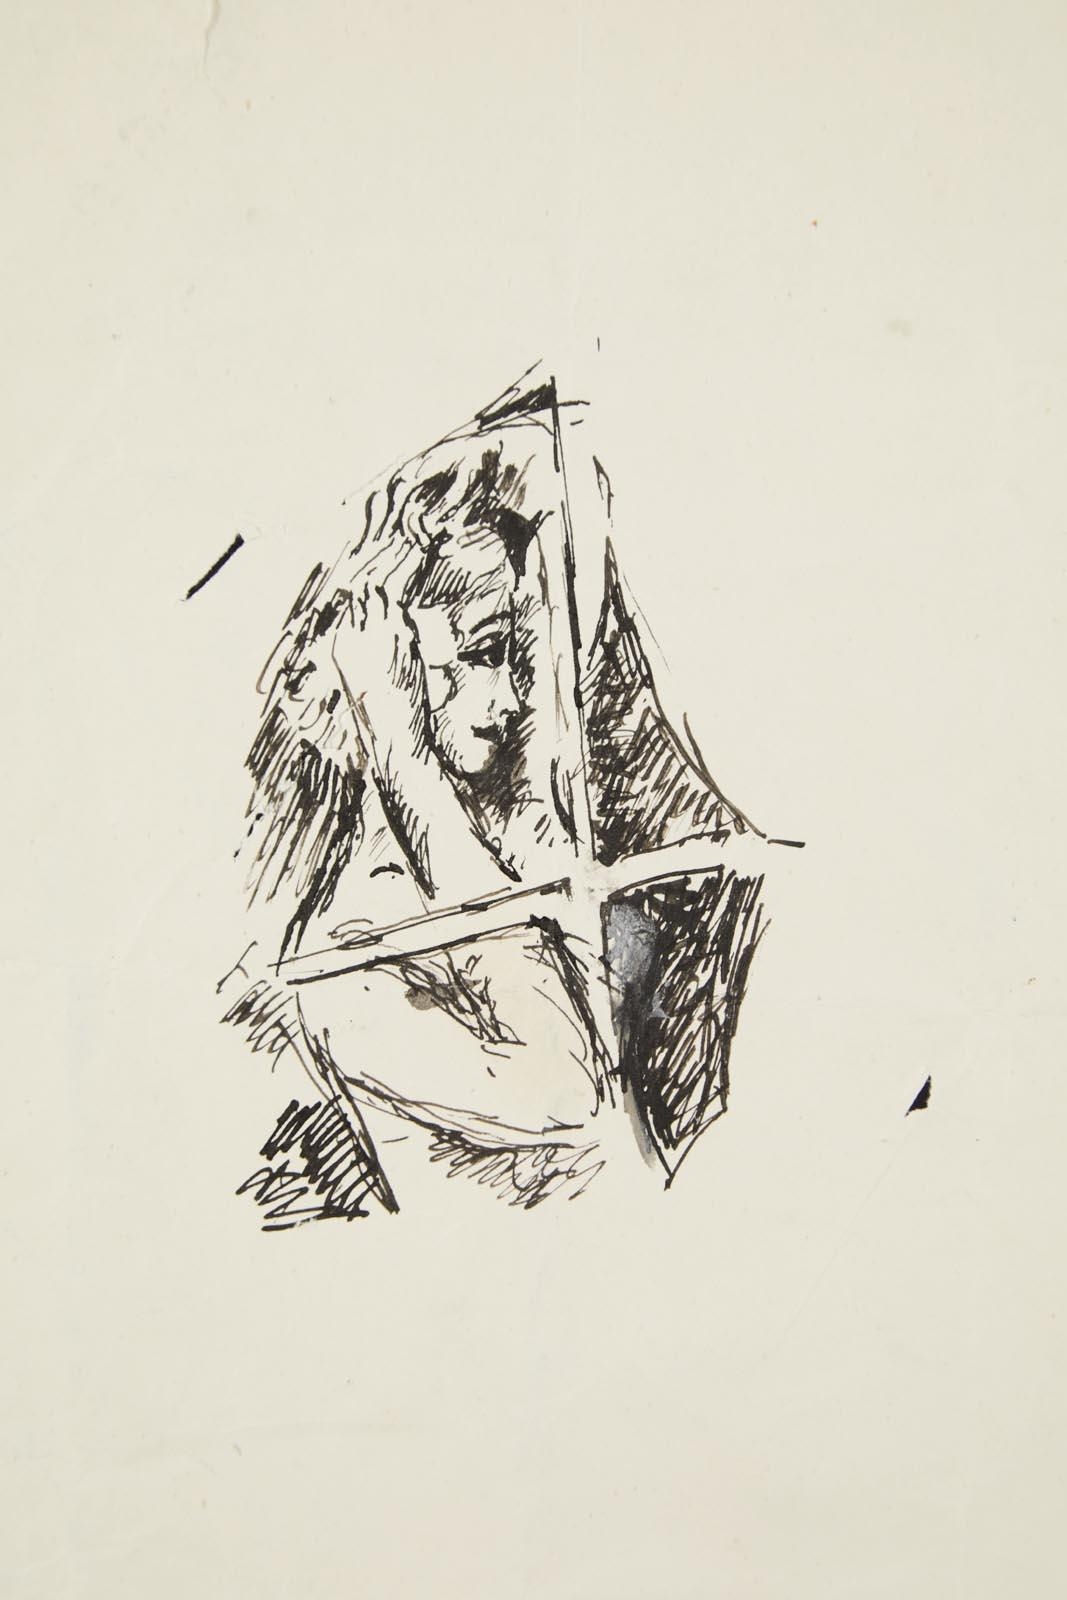 Artwork by Baladine Klossowska, Étude pour « Les Fenêtres », Made of ink on paper